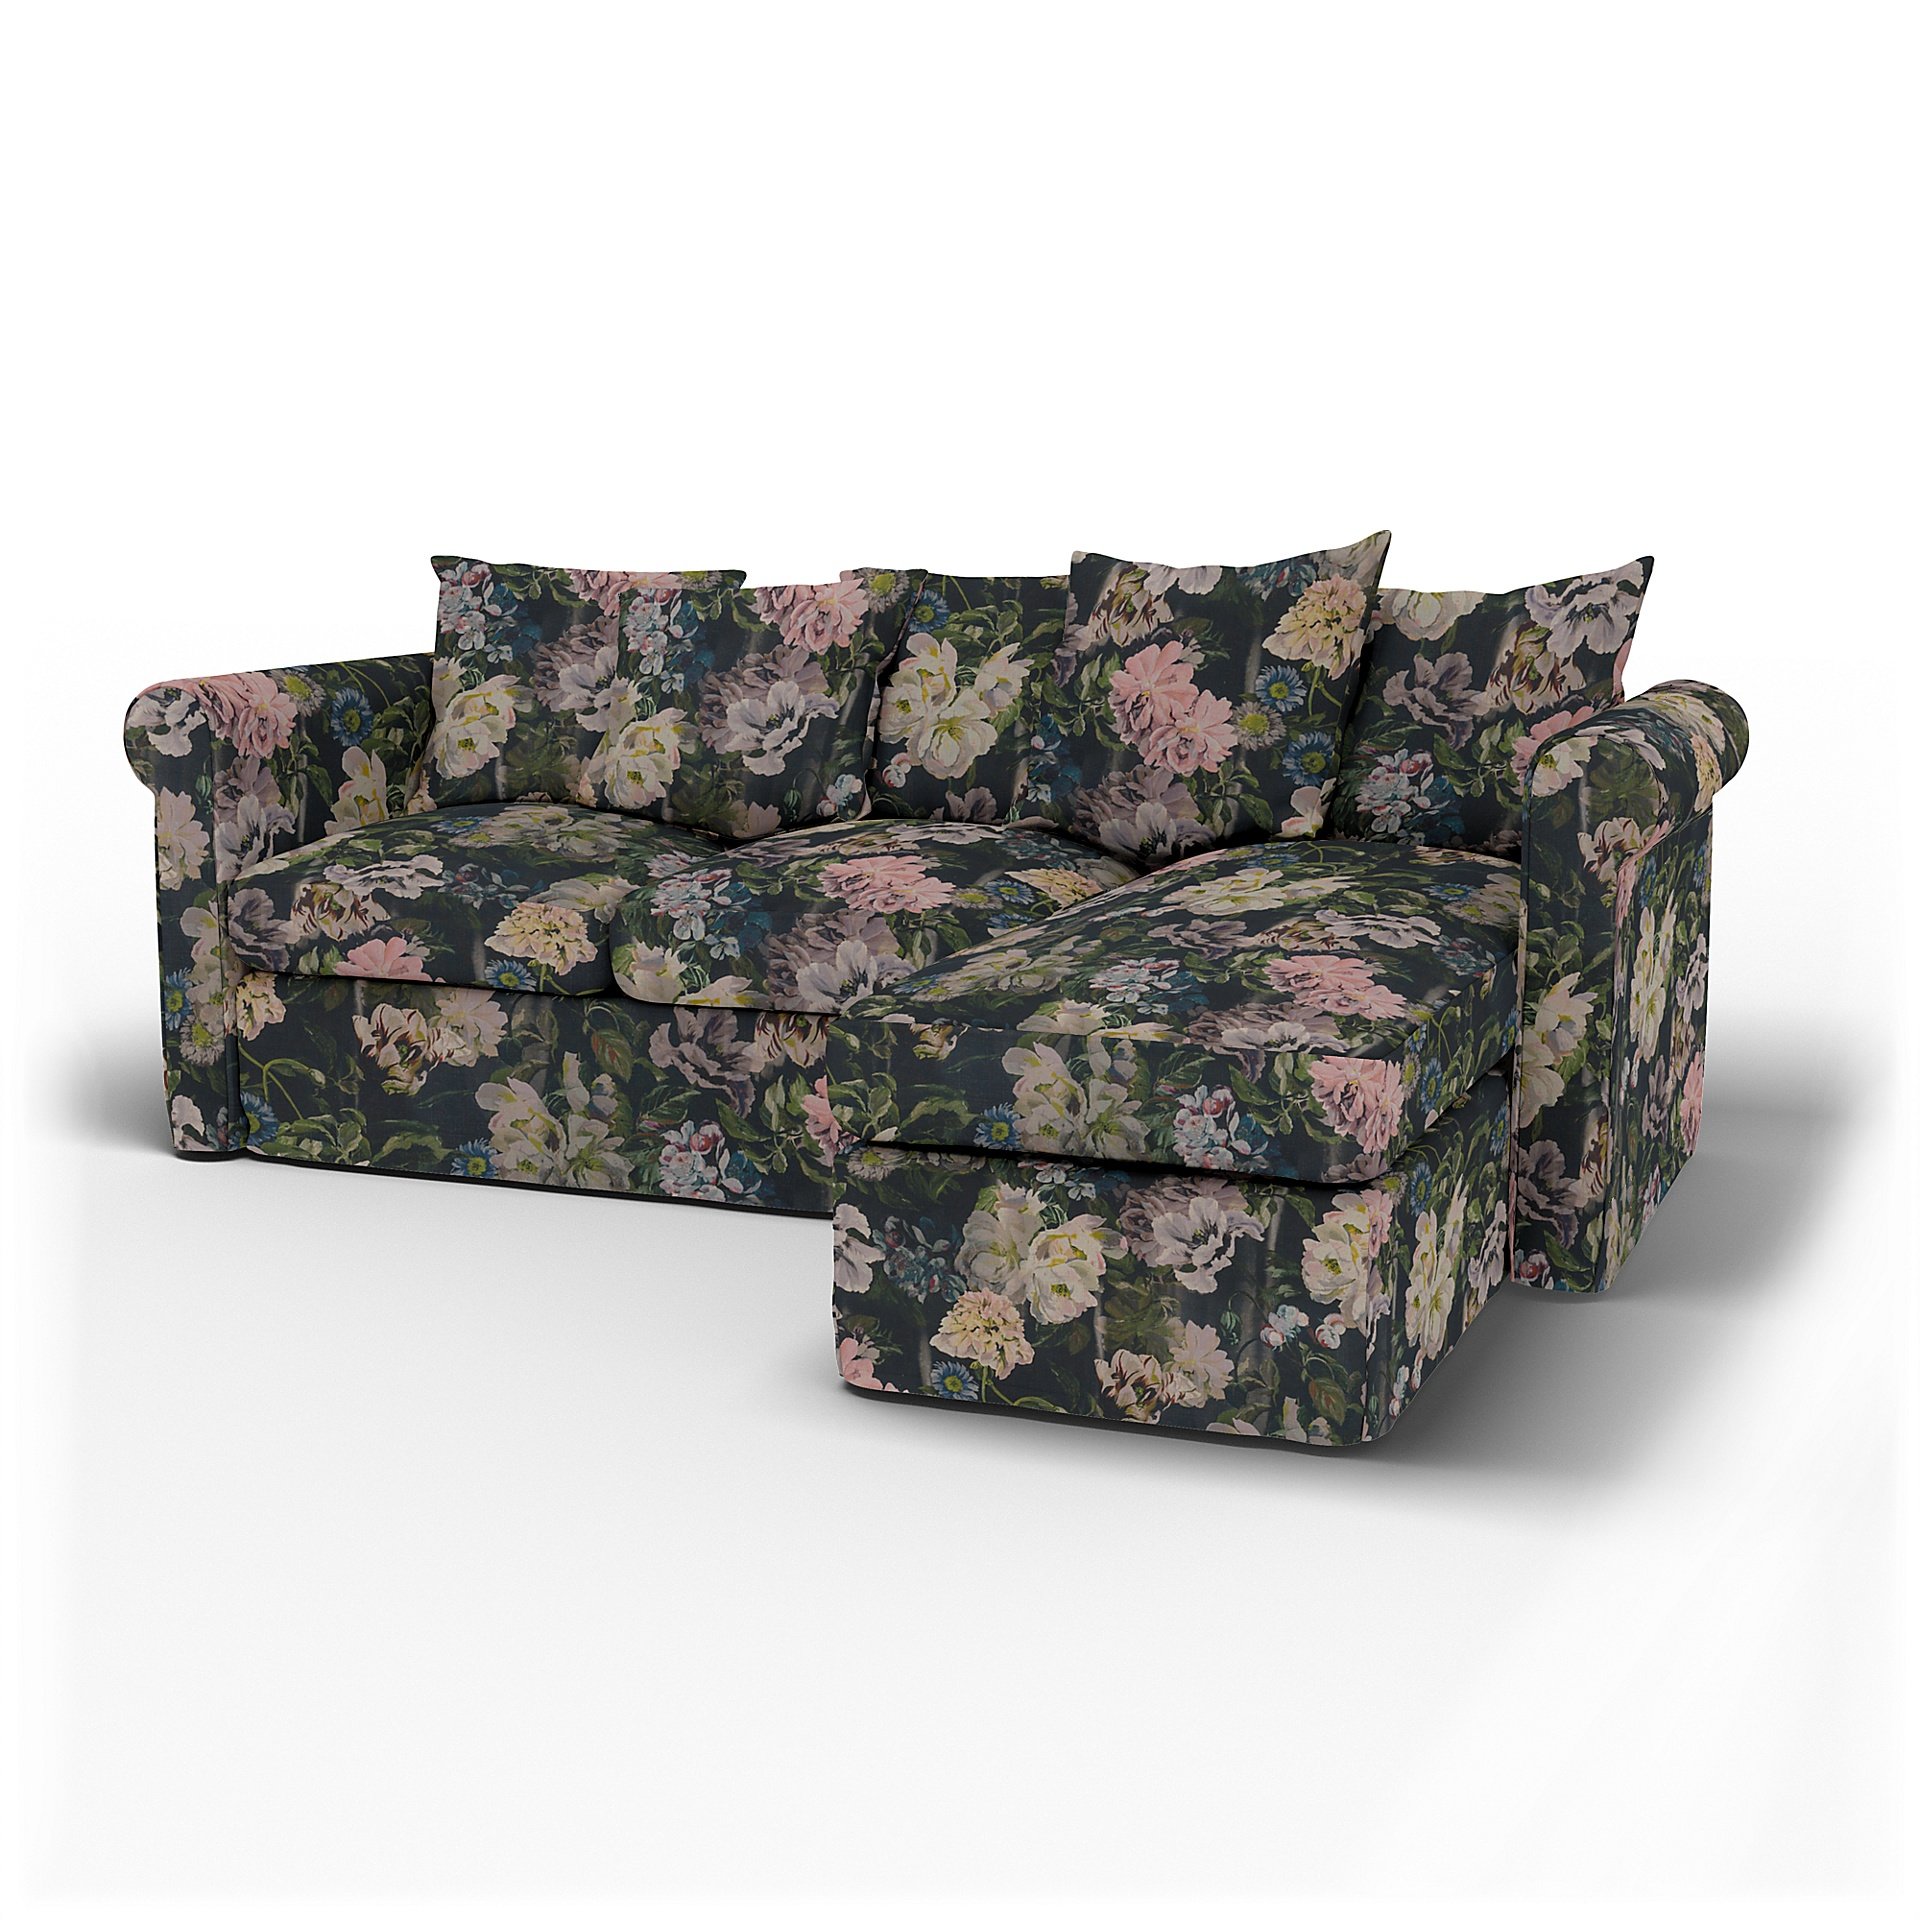 IKEA - Gronlid 3 Seater with Chaise Sofa Cover, Delft Flower - Graphite, Linen - Bemz